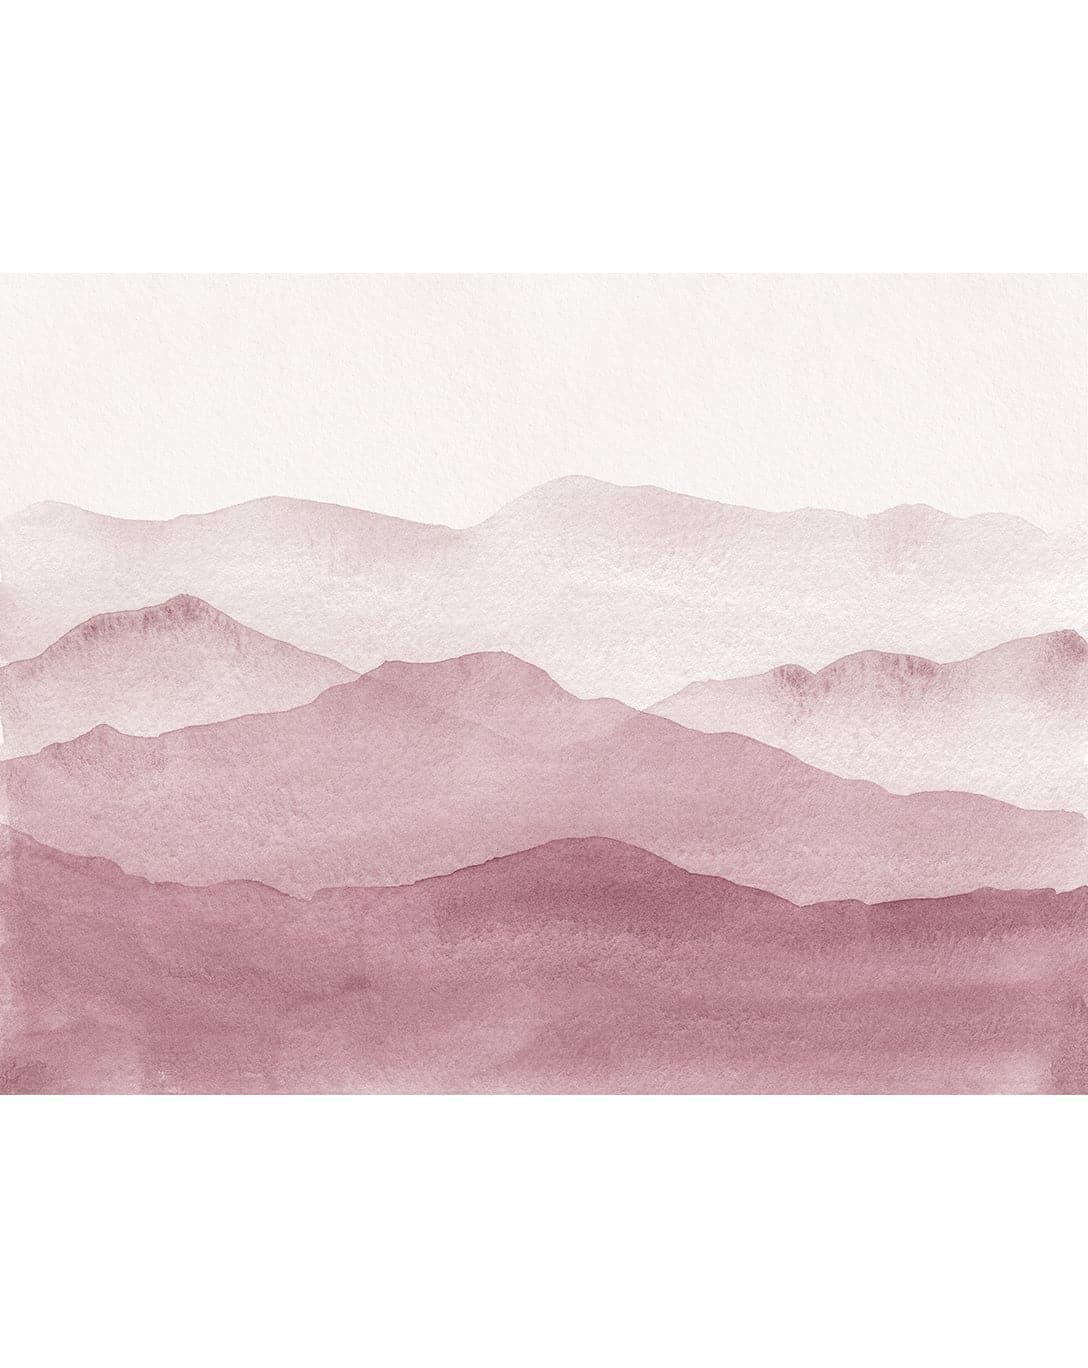 Pink Watercolor Abstract Mountains Mural Pink Watercolor Abstract Mountains Mural Pink Watercolor Abstract Mountains Mural 